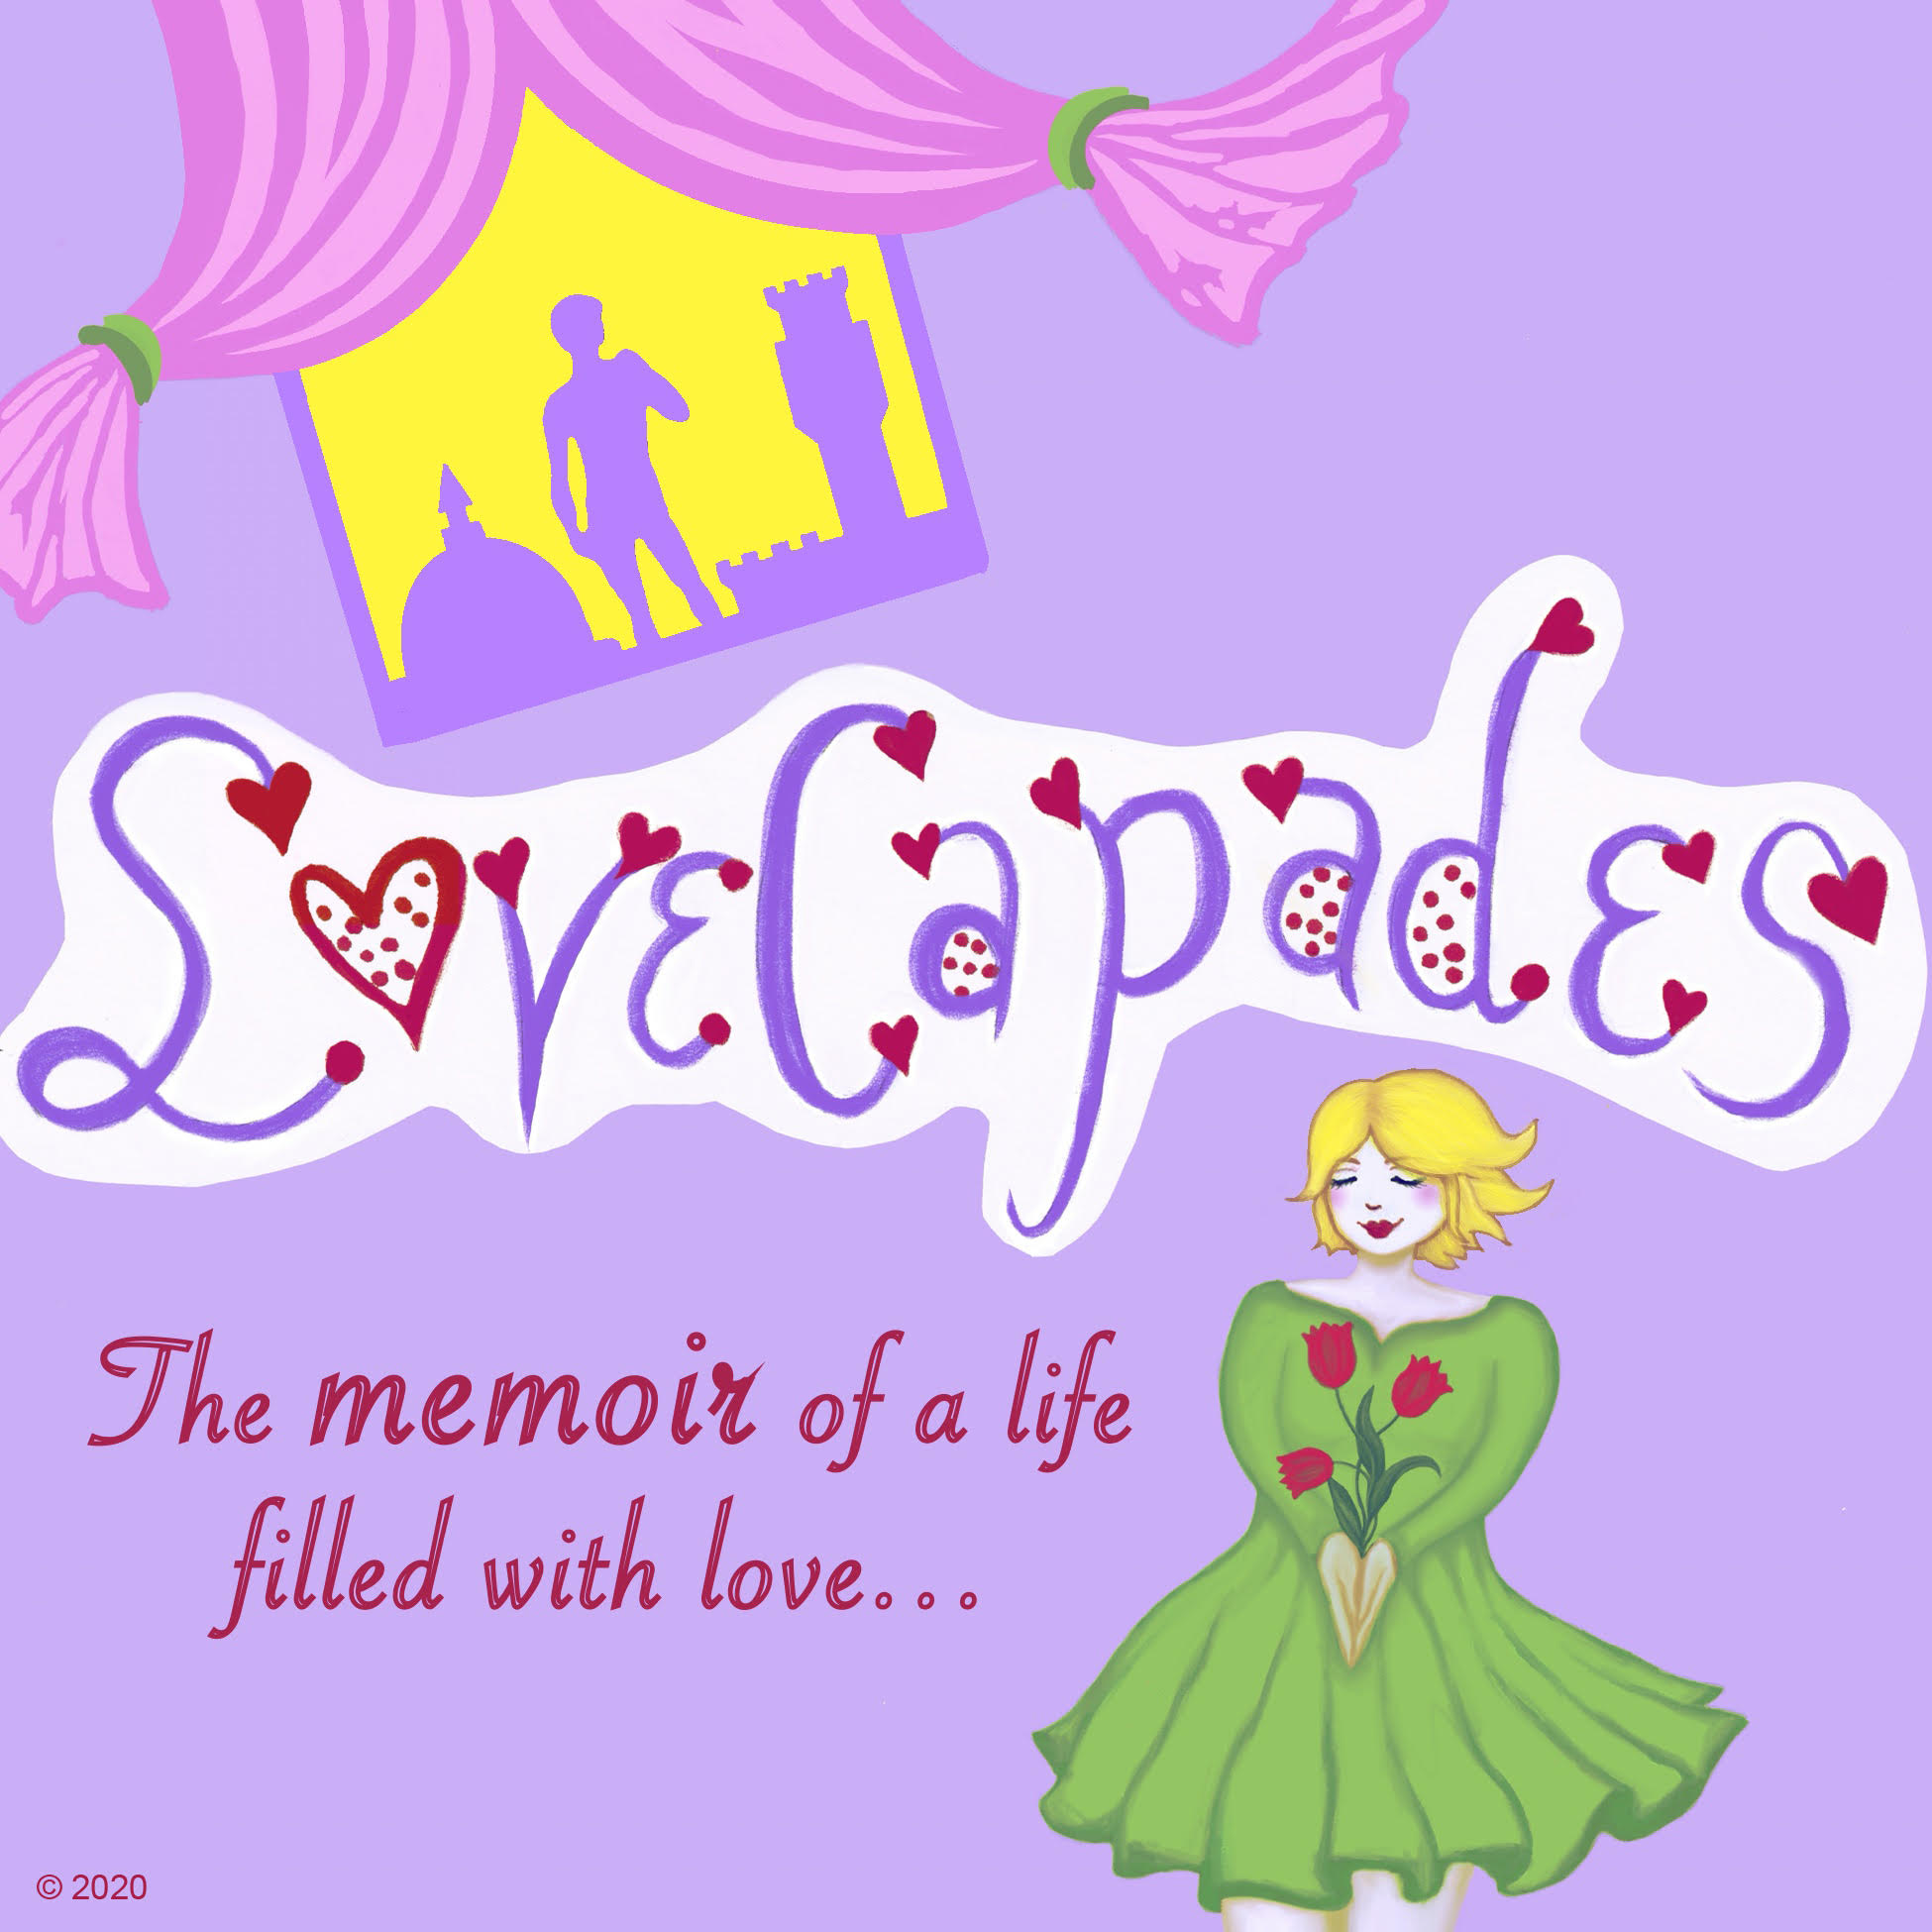 Never miss an episode of the LoveCapades podcast!